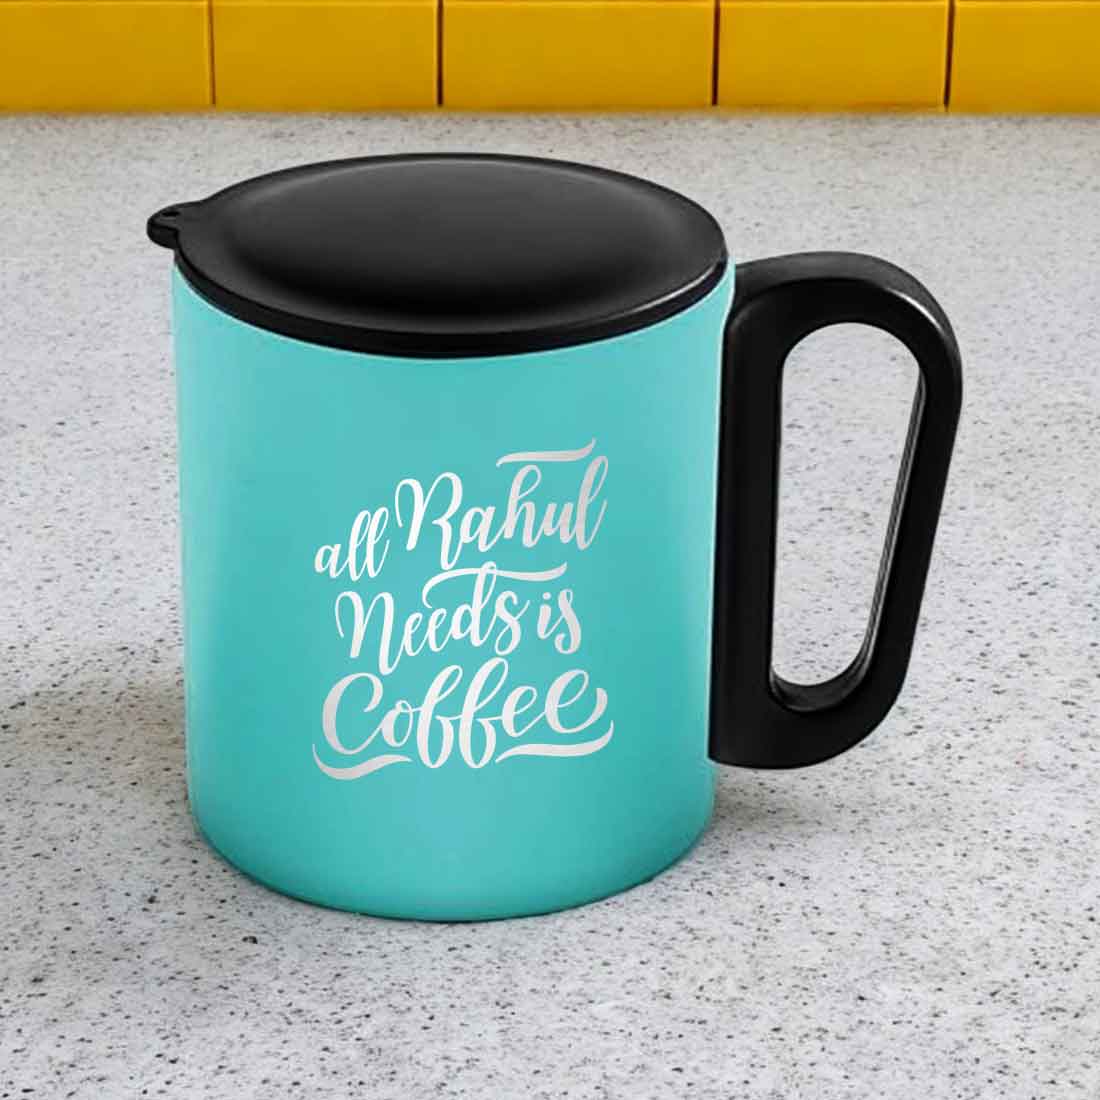 Steel Mug for Coffee with Name -  Insulated Stainless Steel Coffee Cup